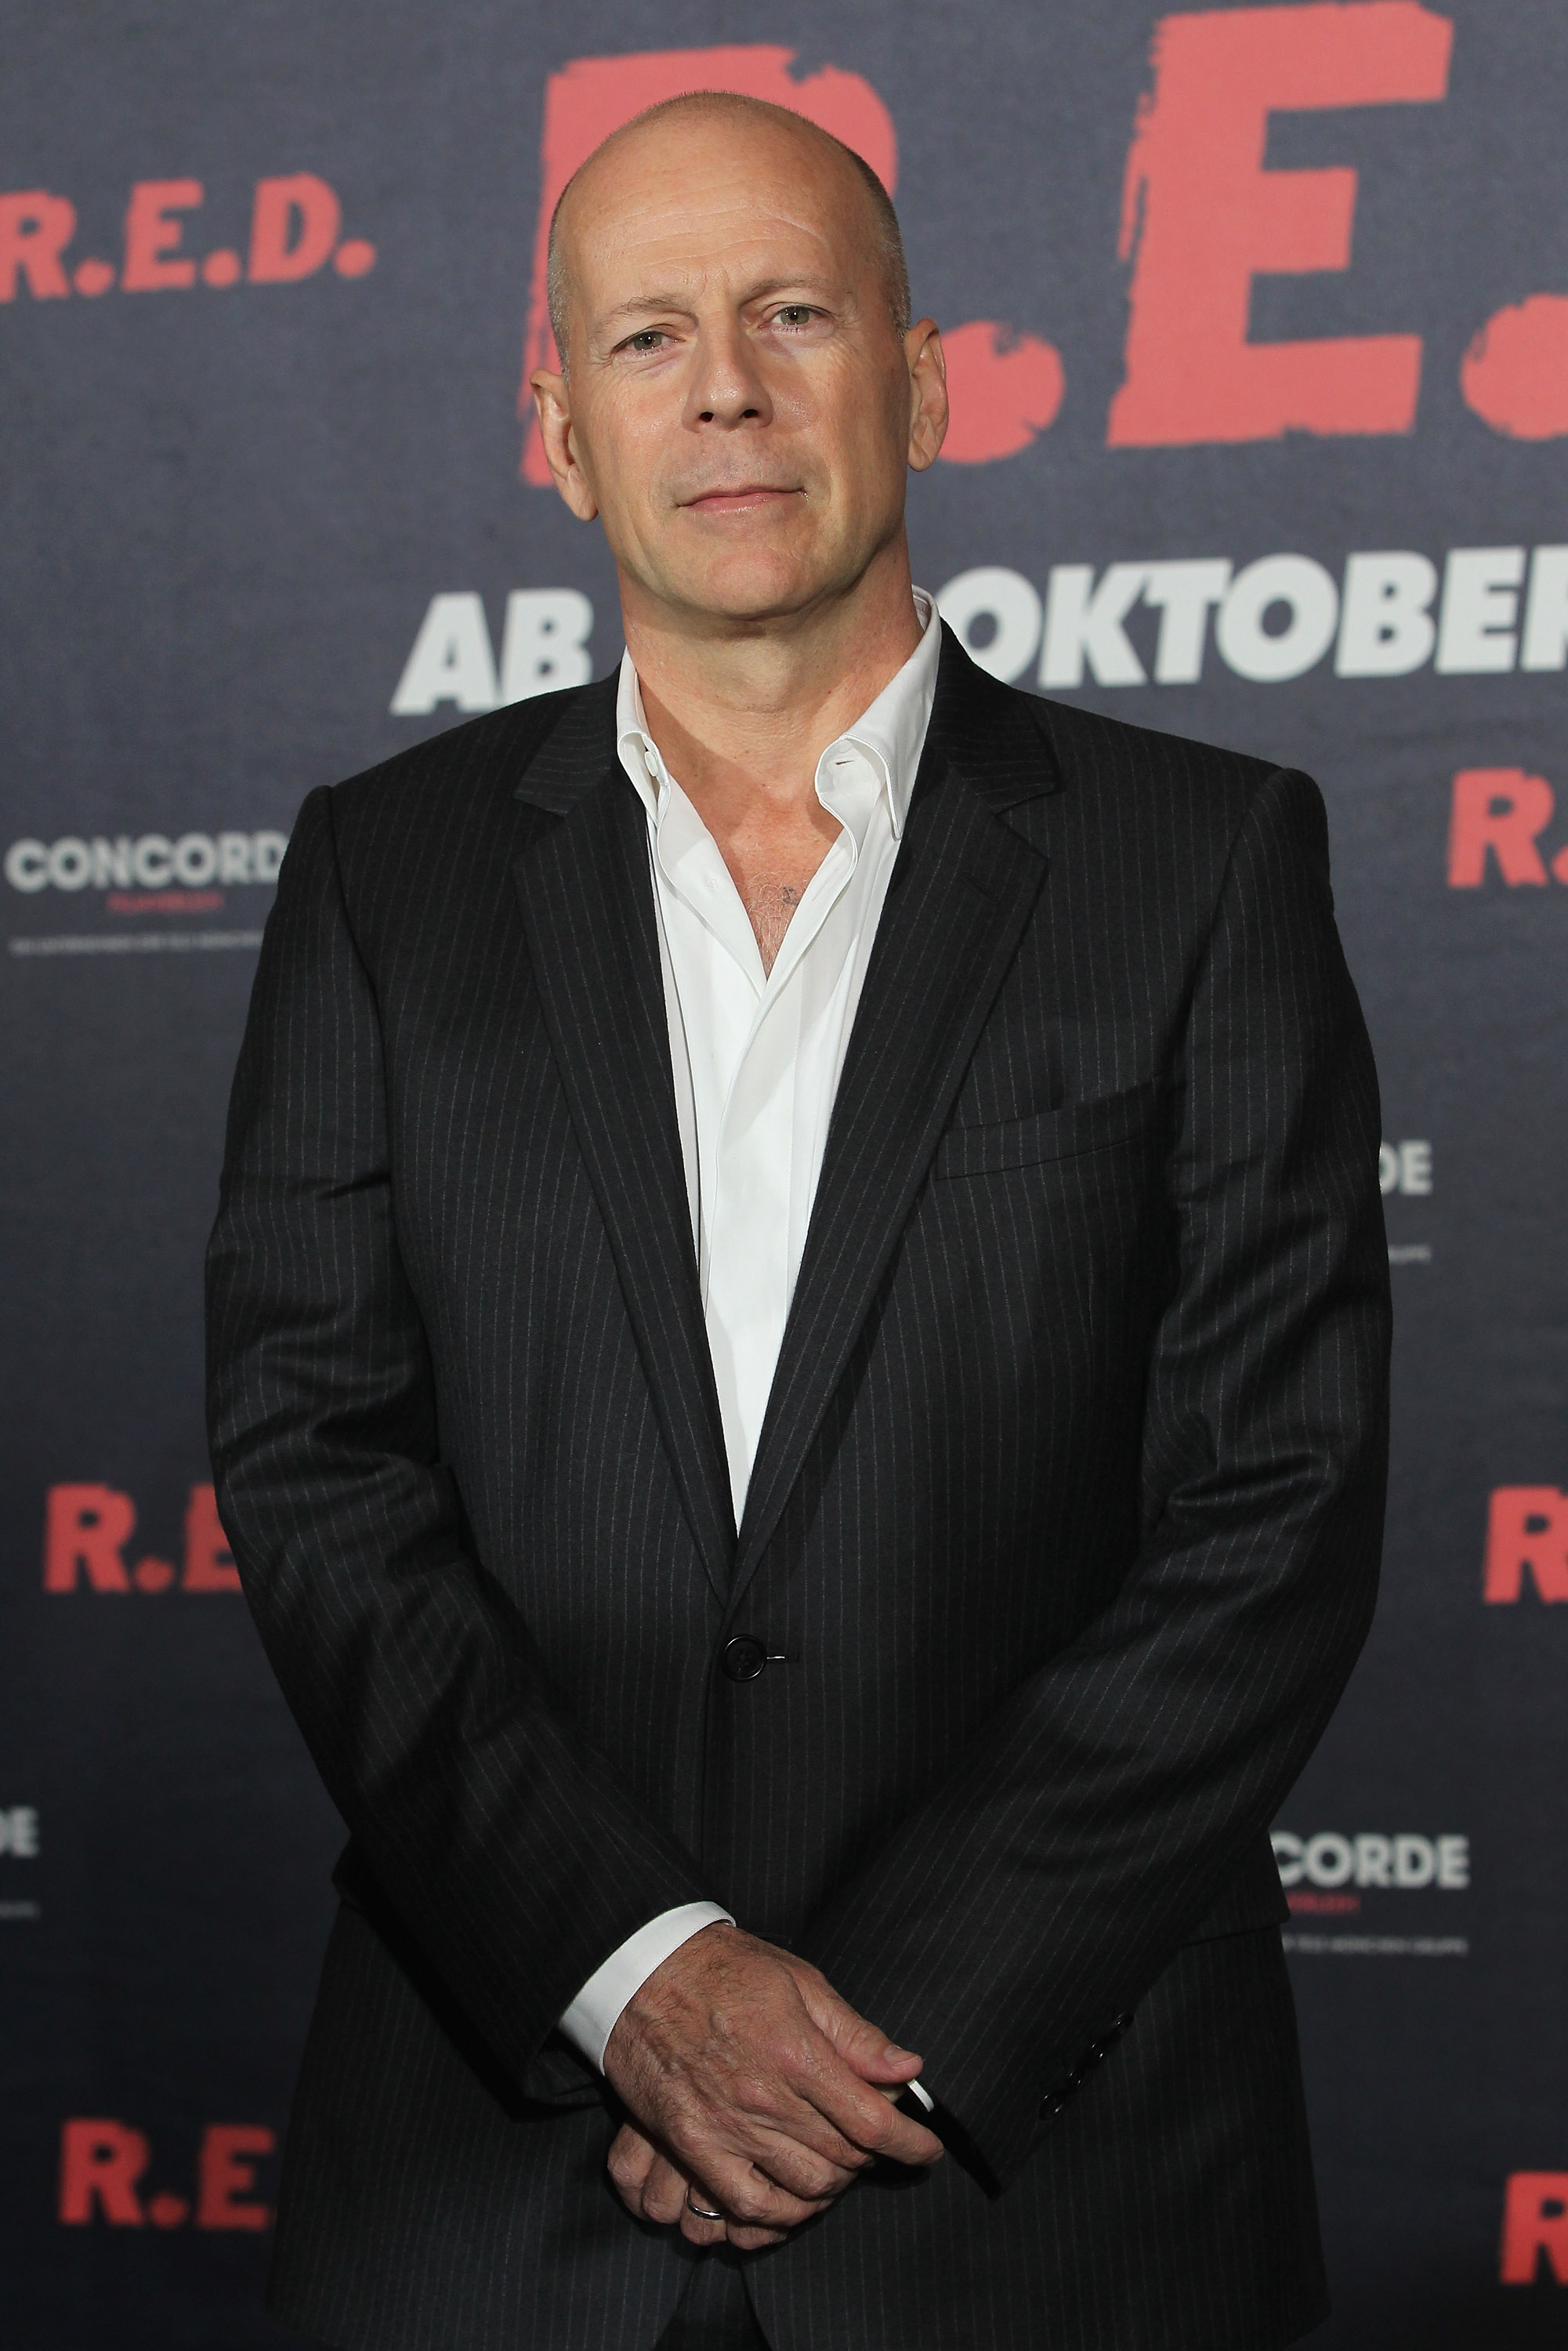 Bruce Willis attends a photocall to present the movie "RED" at the Regent Hotel on October 18, 2010, in Berlin, Germany. | Source: Getty Images